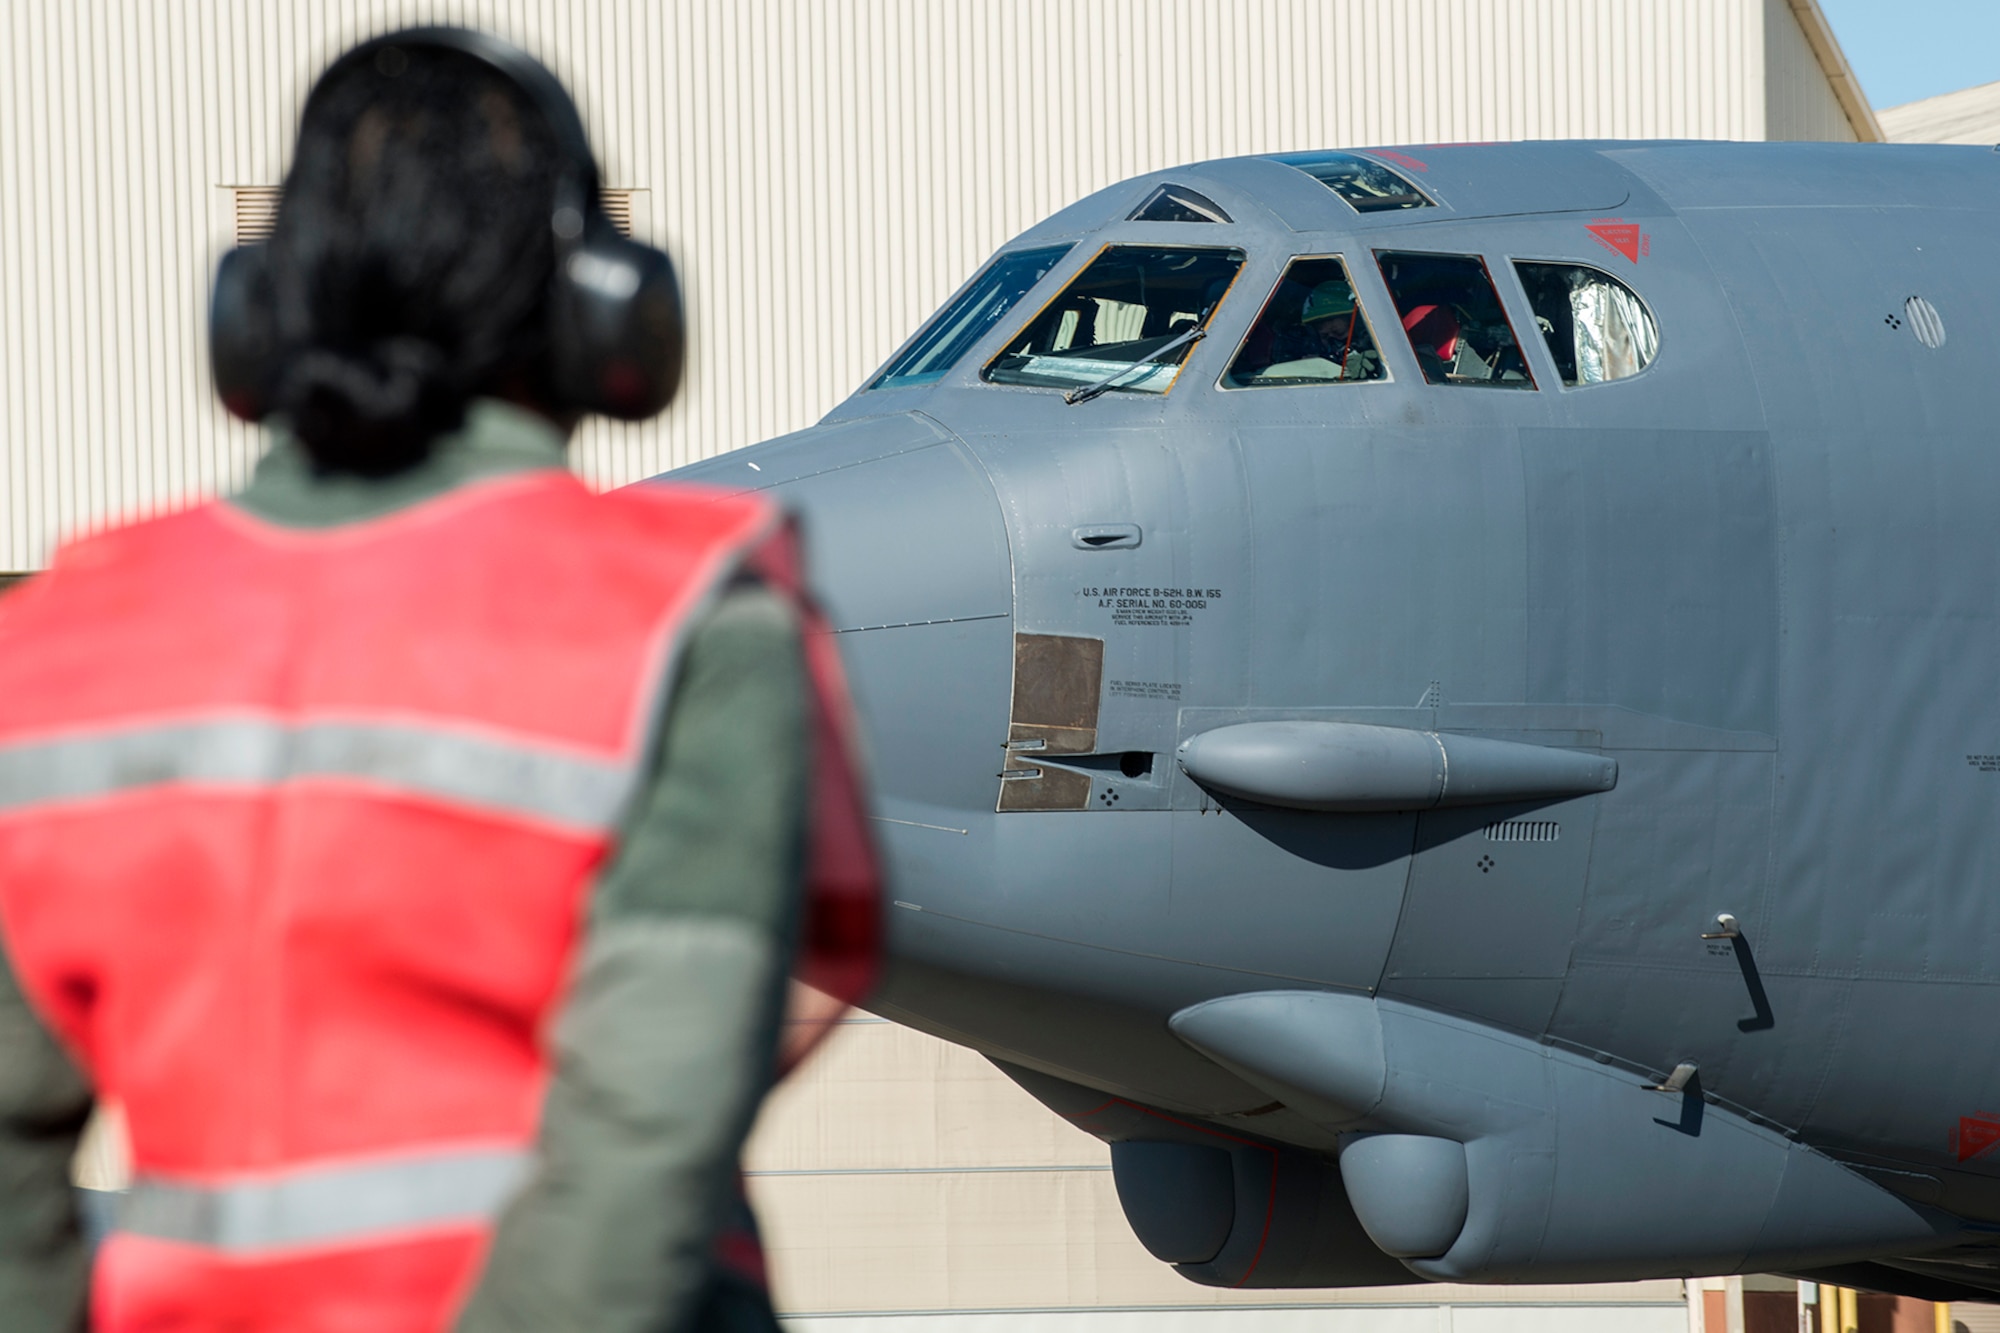 U.S. Air Force Tech. Sgt. Holly Guerra, assigned to the 307th Aircraft Maintenance Squadron, prepares to marshal a B-52H Stratofortress from its parking spot for a mission on Mar. 22, 2013, Barksdale Air Force Base, La. In recognition of Women’s History Month, the Air Force Reserve Command’s 307th Bomb Wing and Barksdale’s 2nd Bomb Wing launched two B-52H Stratofortress bombers flown by two all-female aircrews made up from members of the Air Force Reserve Command’s 93rd and 343rd Bomb Squadrons and the 2nd Bomb Wing’s 11th, 20th and 96th Bomb Squadrons. (U.S. Air Force photo by Master Sgt. Greg Steele/Released)